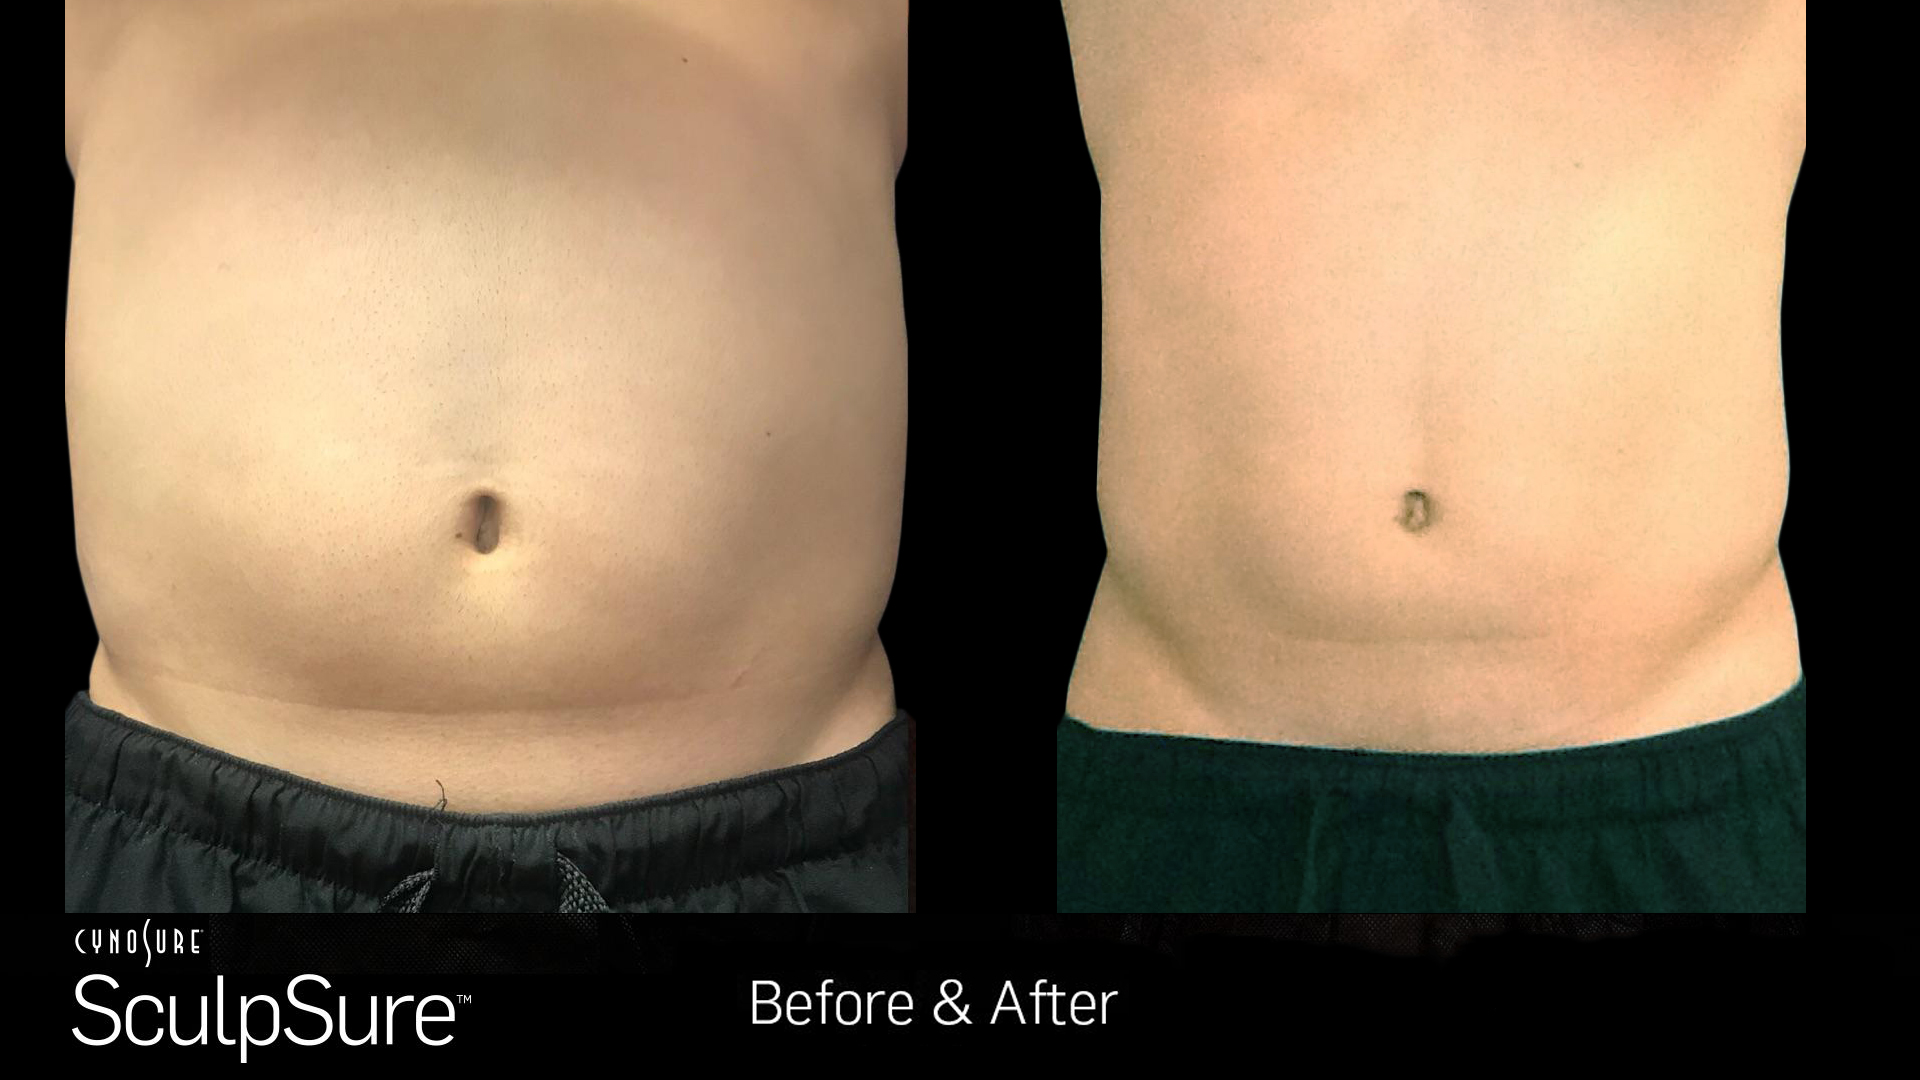 Male body, before and after SculpSure fat removal treatment, front view